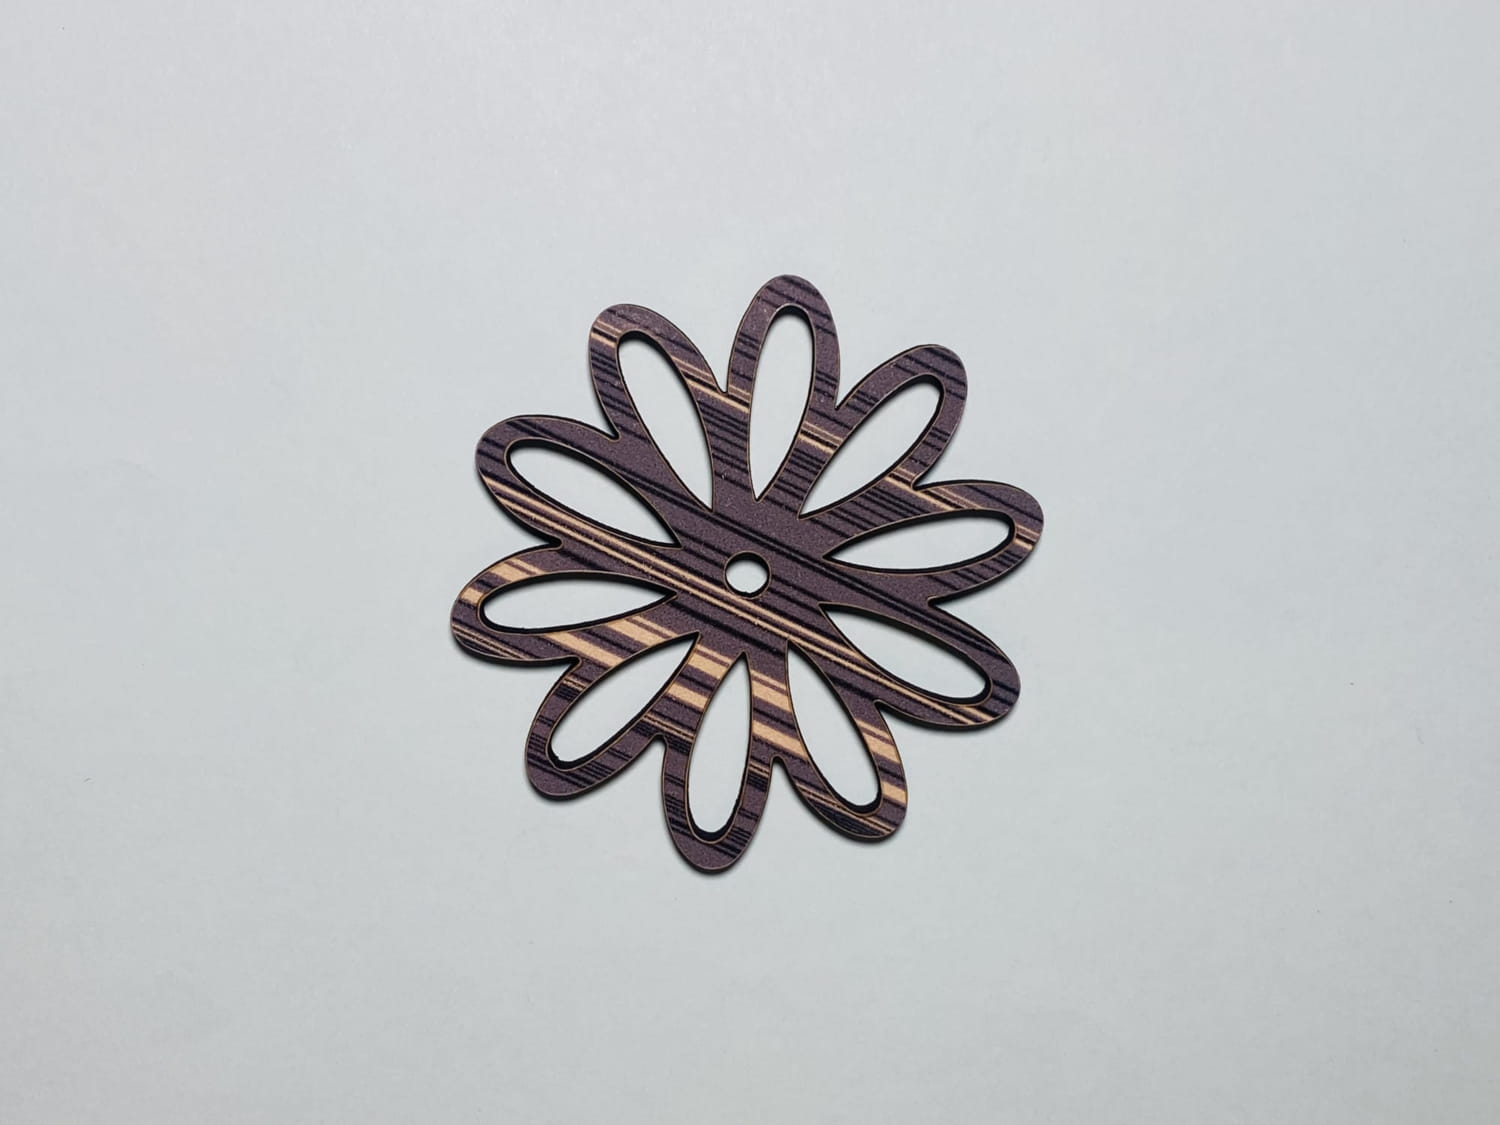 Laser Cut Unfinished Wooden Flower Shape Cutout Free Vector